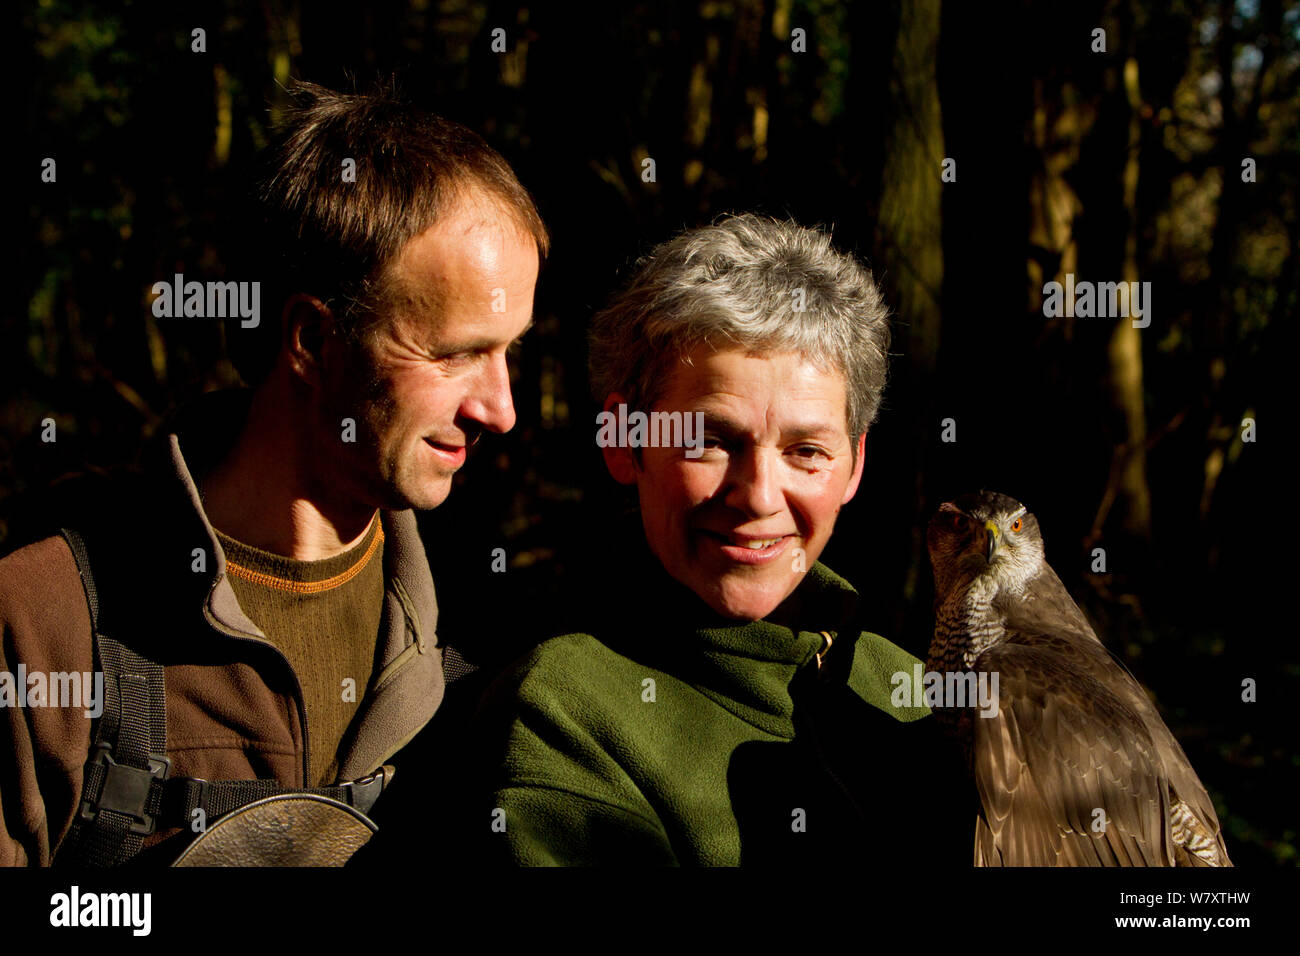 Rose and Lloyd Buck, professional bird handlers and trainers, holding adult female Goshawk (Accipiter gentilis) Somerset, UK, January 2013. Captive, occurs throughout much of the Northern Hemisphere. Stock Photo